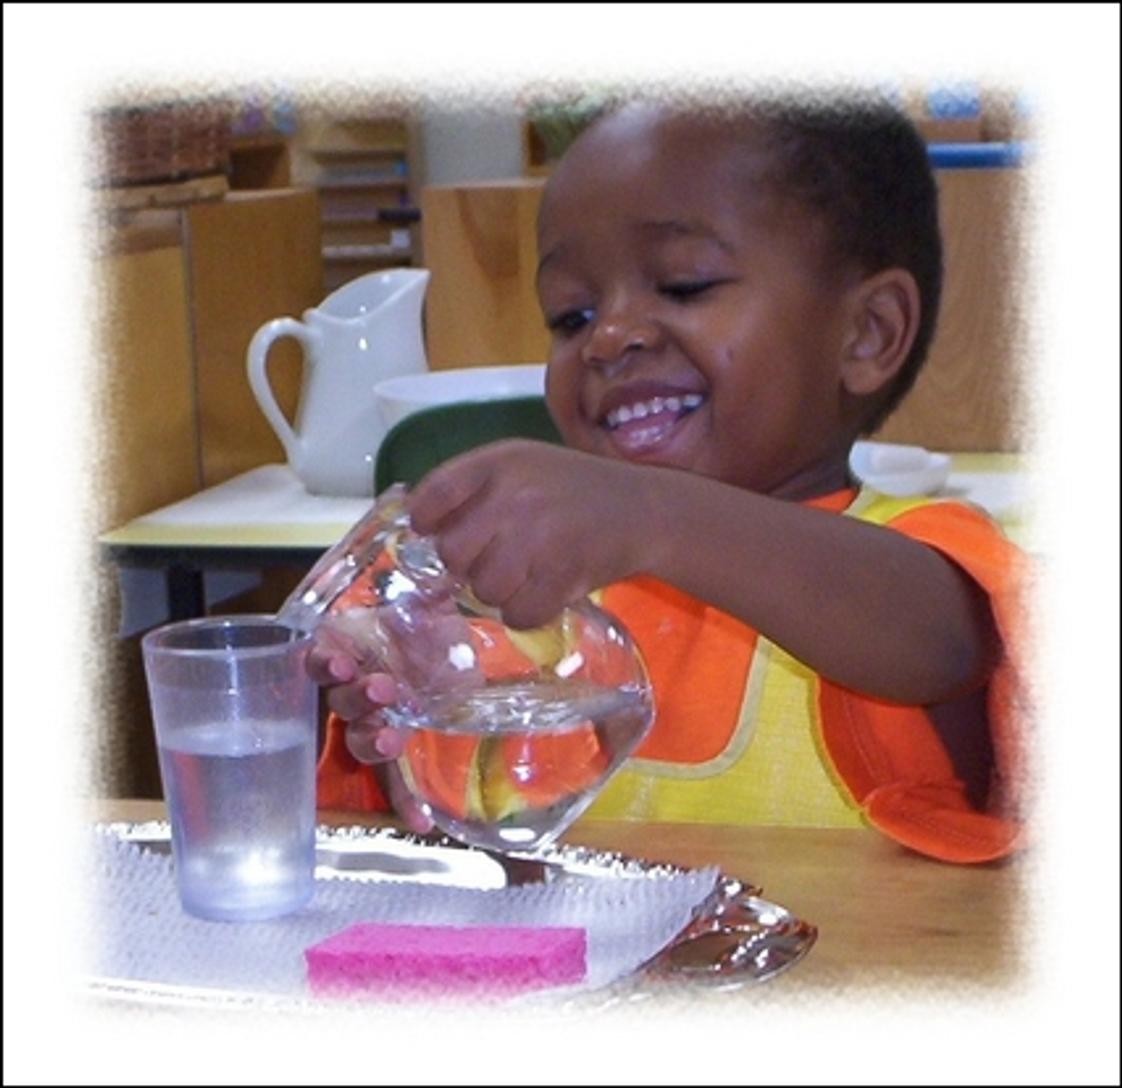 Oak Meadow Montessori Photo - Children love the area of Practical Life in the Montessori classroom. This student is happily pouring water and learning fine muscle control and how to serve a beverage to his friends.